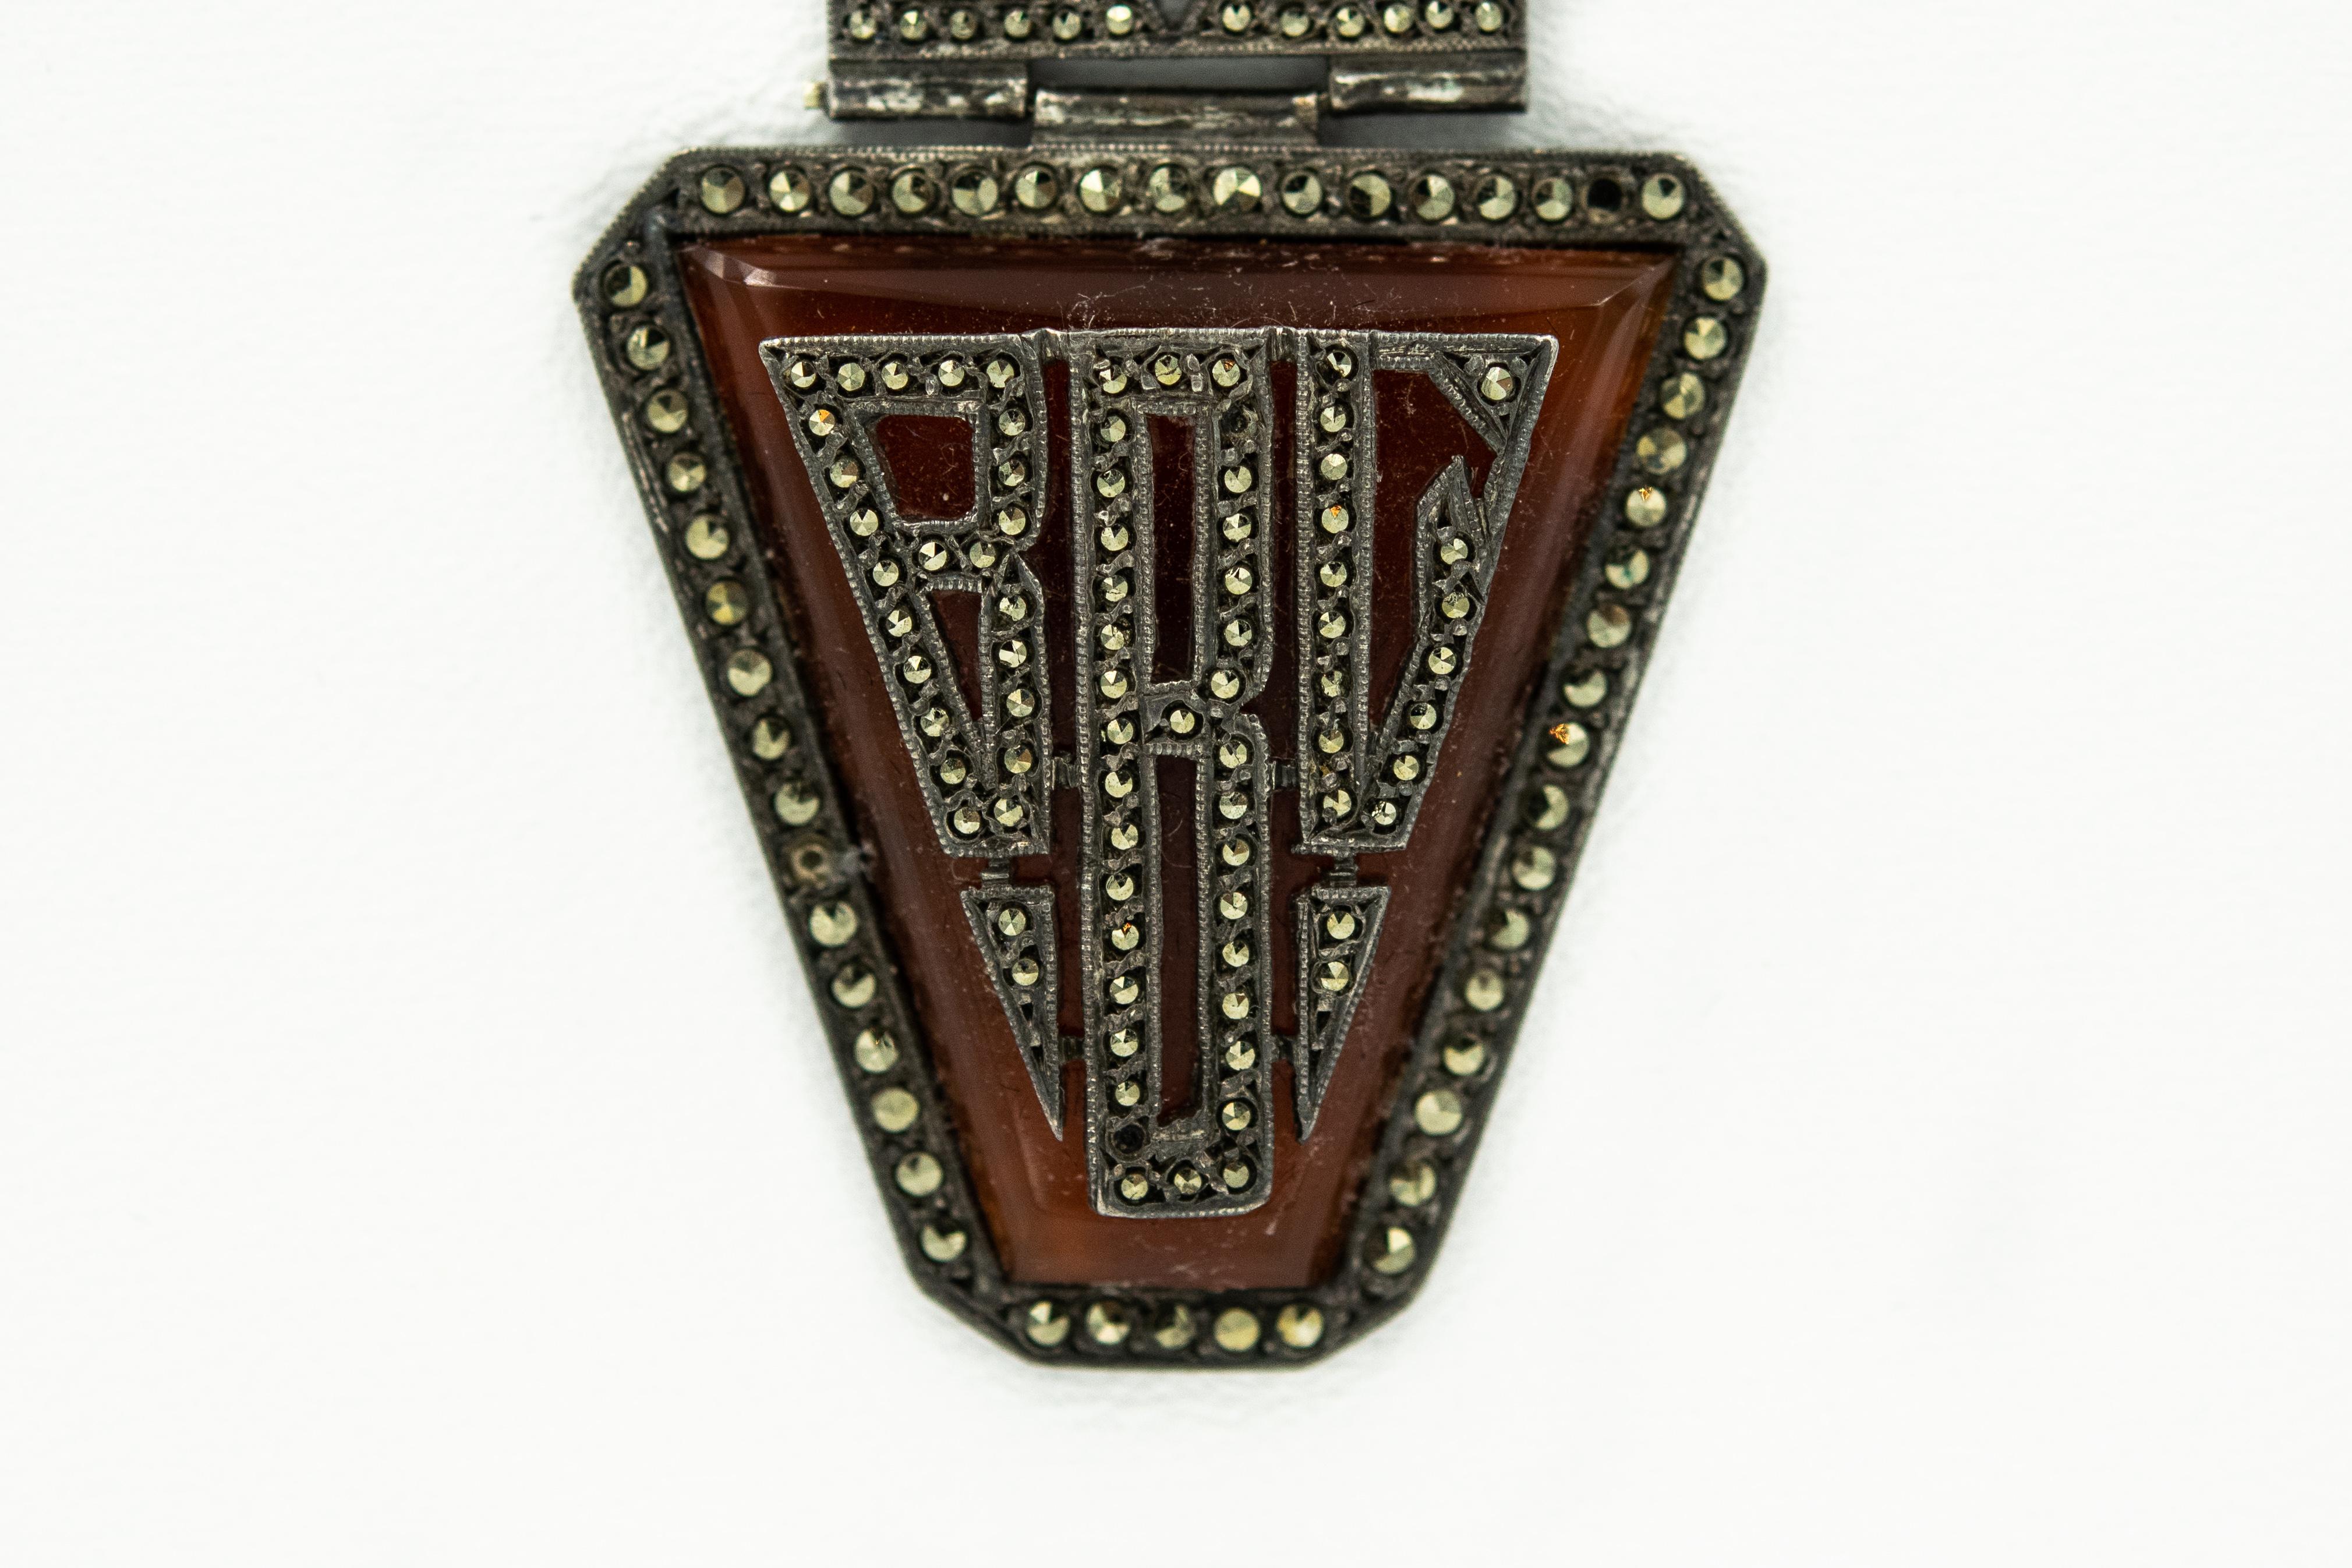 Art Deco lapel brooch pin featuring three sections of marcasite and French carnelian hand cut glass set in white metal. The bottom section features the initials BBC or BRG. . No makers mark, but it is stamped made in France.  The pin area is a